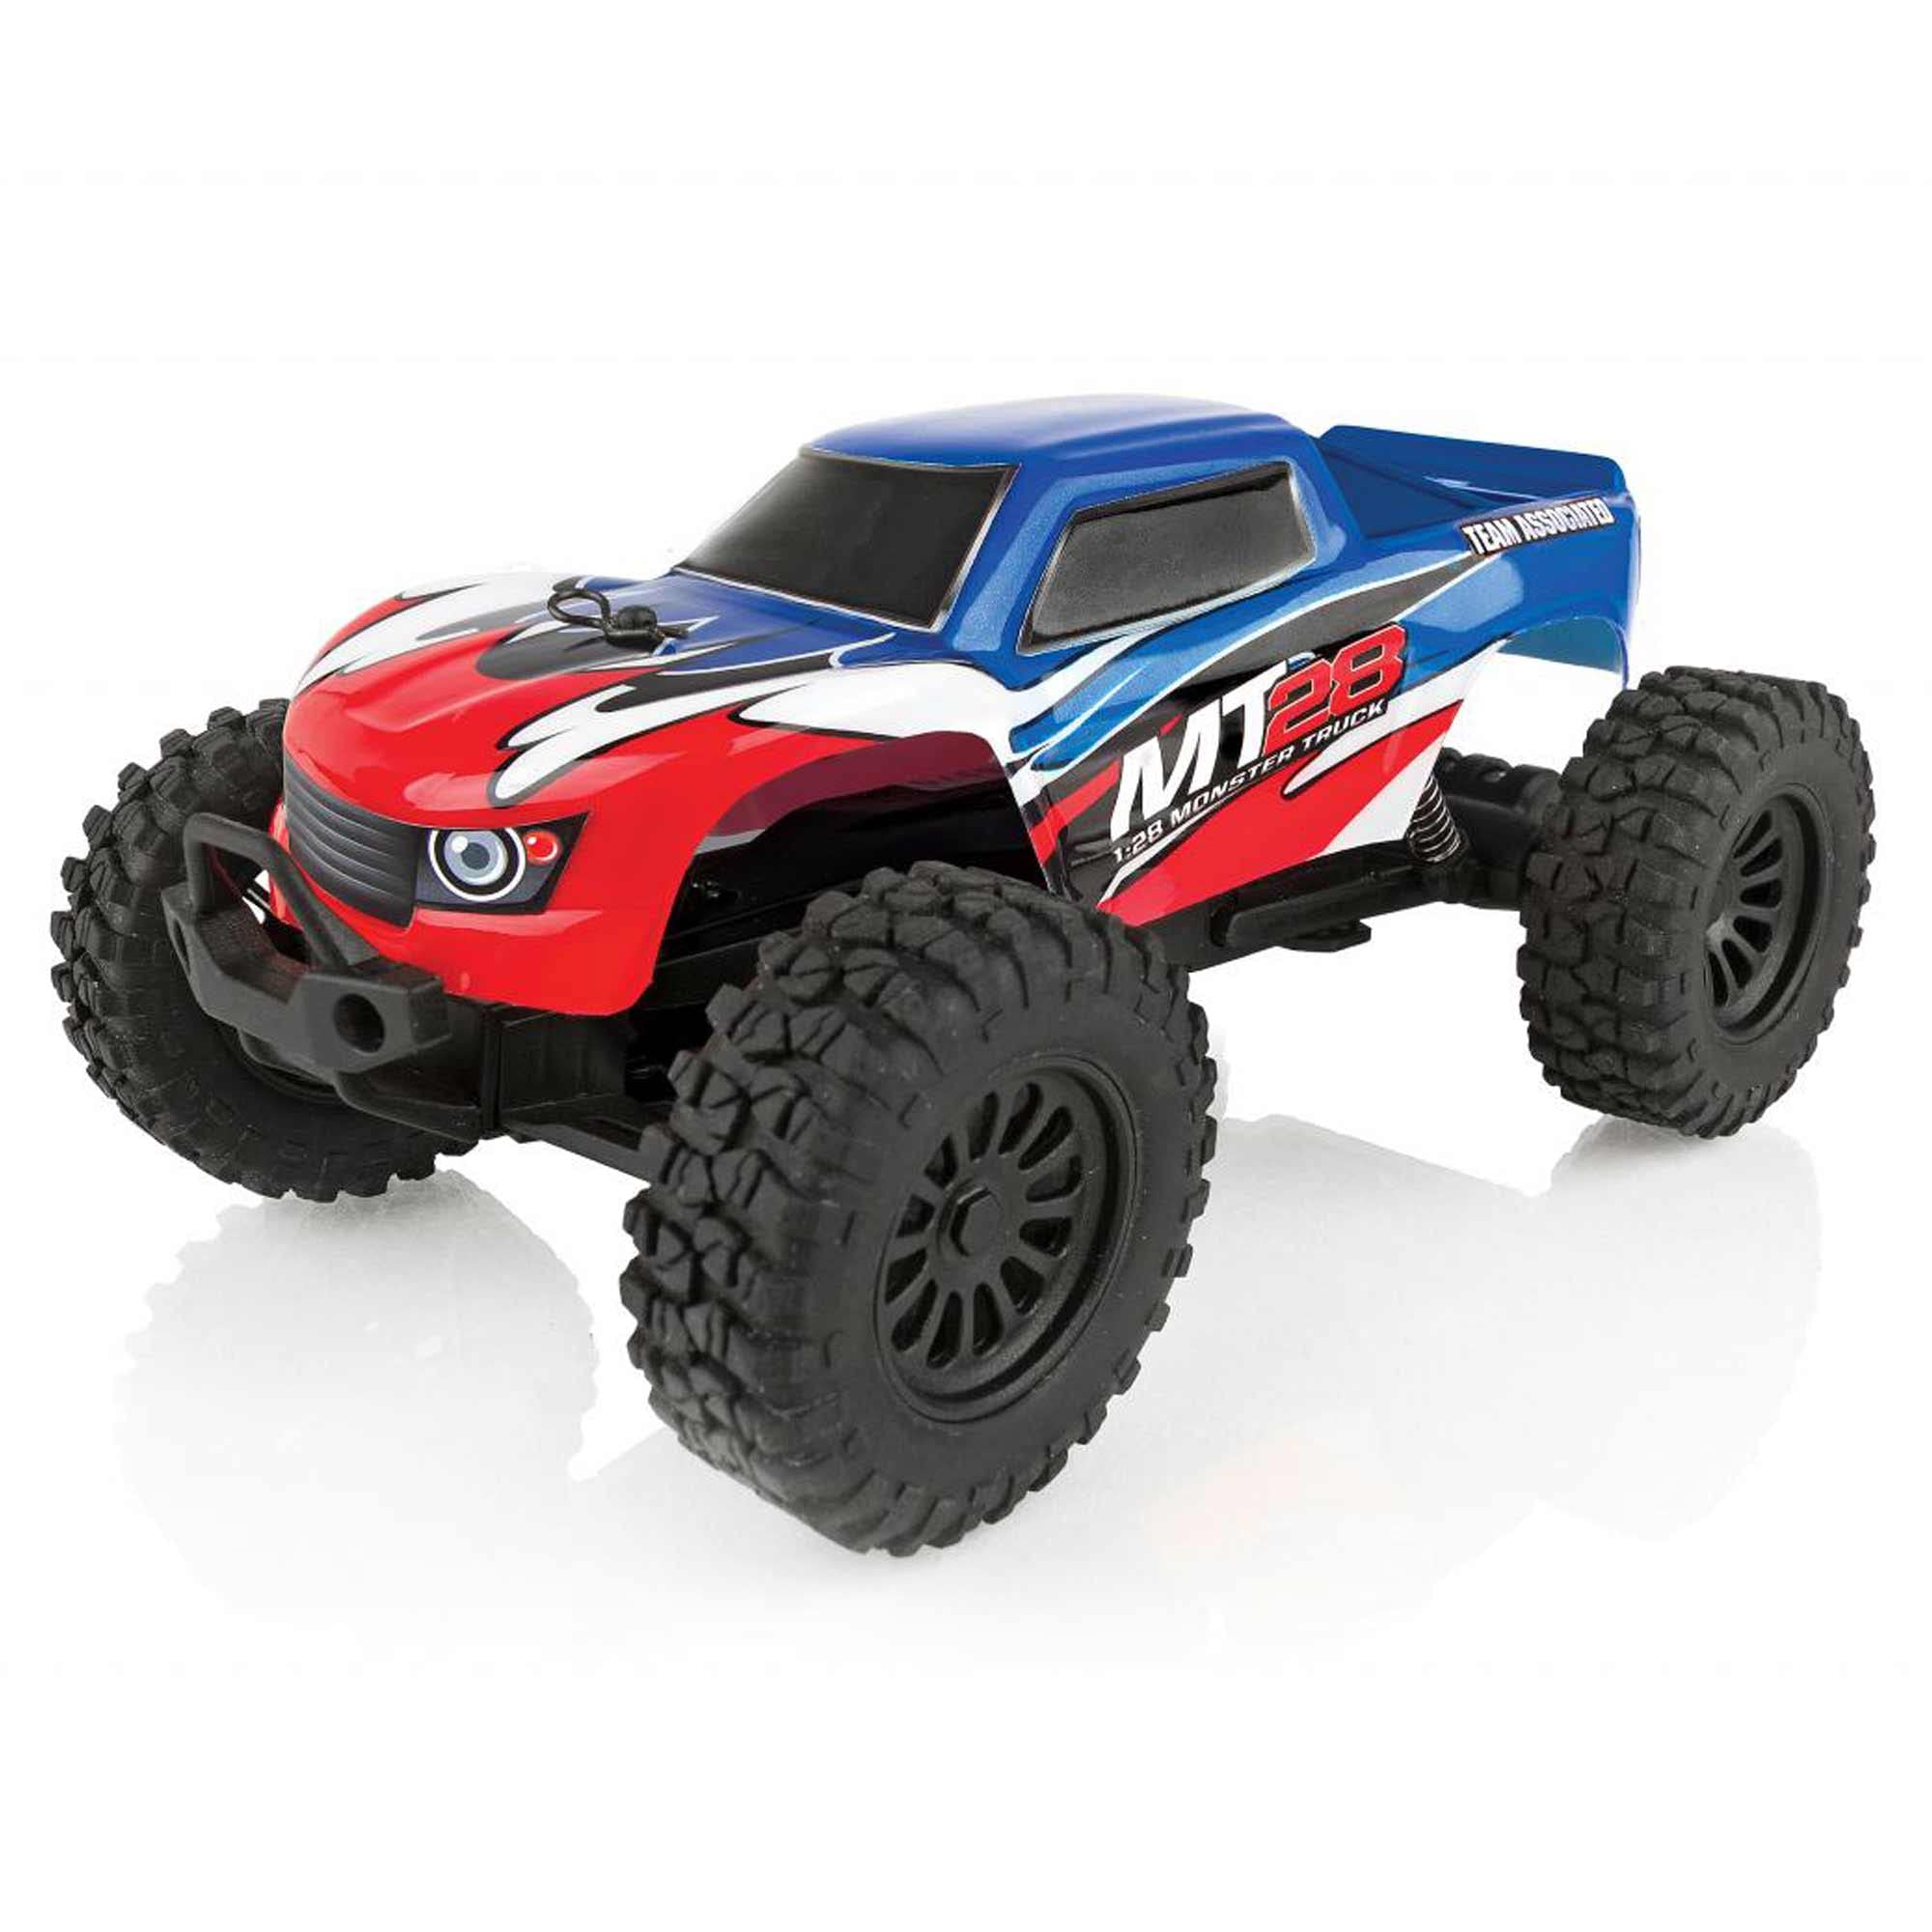 Team Associated 20155 MT28 Monster Truck Ready to Run 128 Scale 2WD with Battery Charger 2.4Ghz Transmitter 送料無